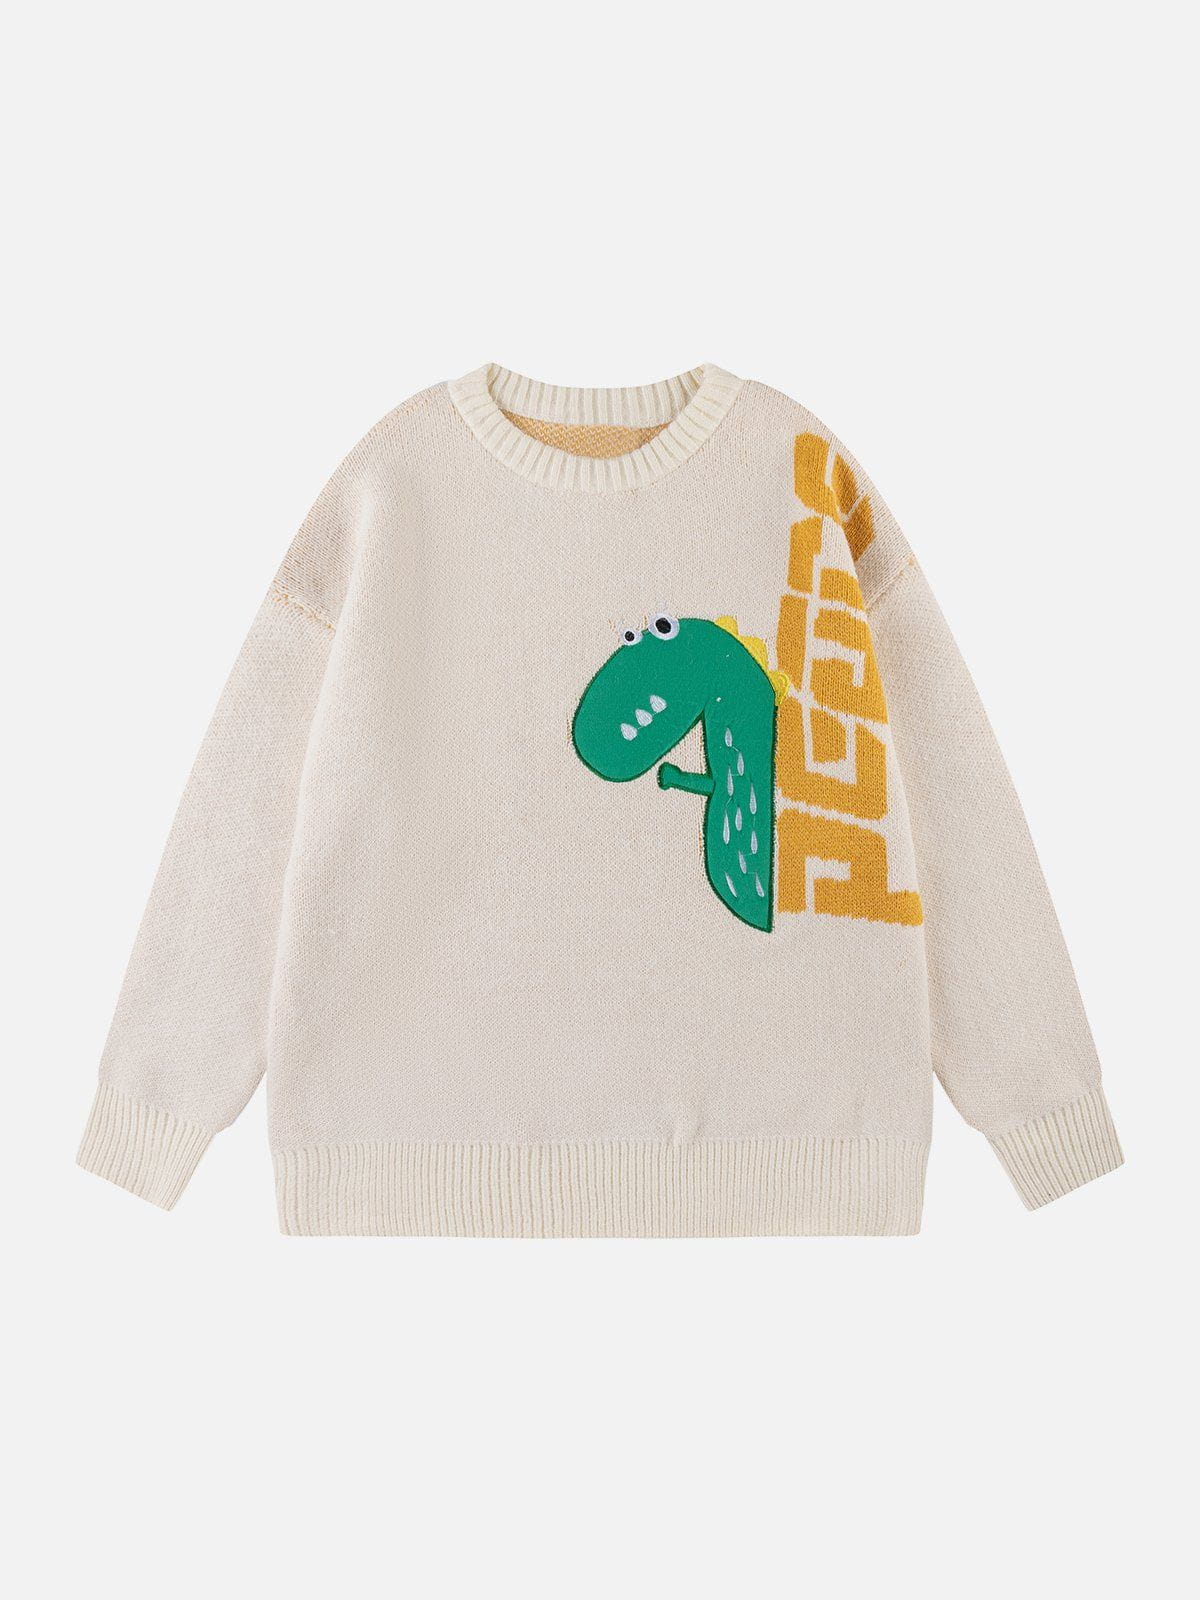 Majesda® - Embroidery Dinosaur Graphic Sweater outfit ideas streetwear fashion